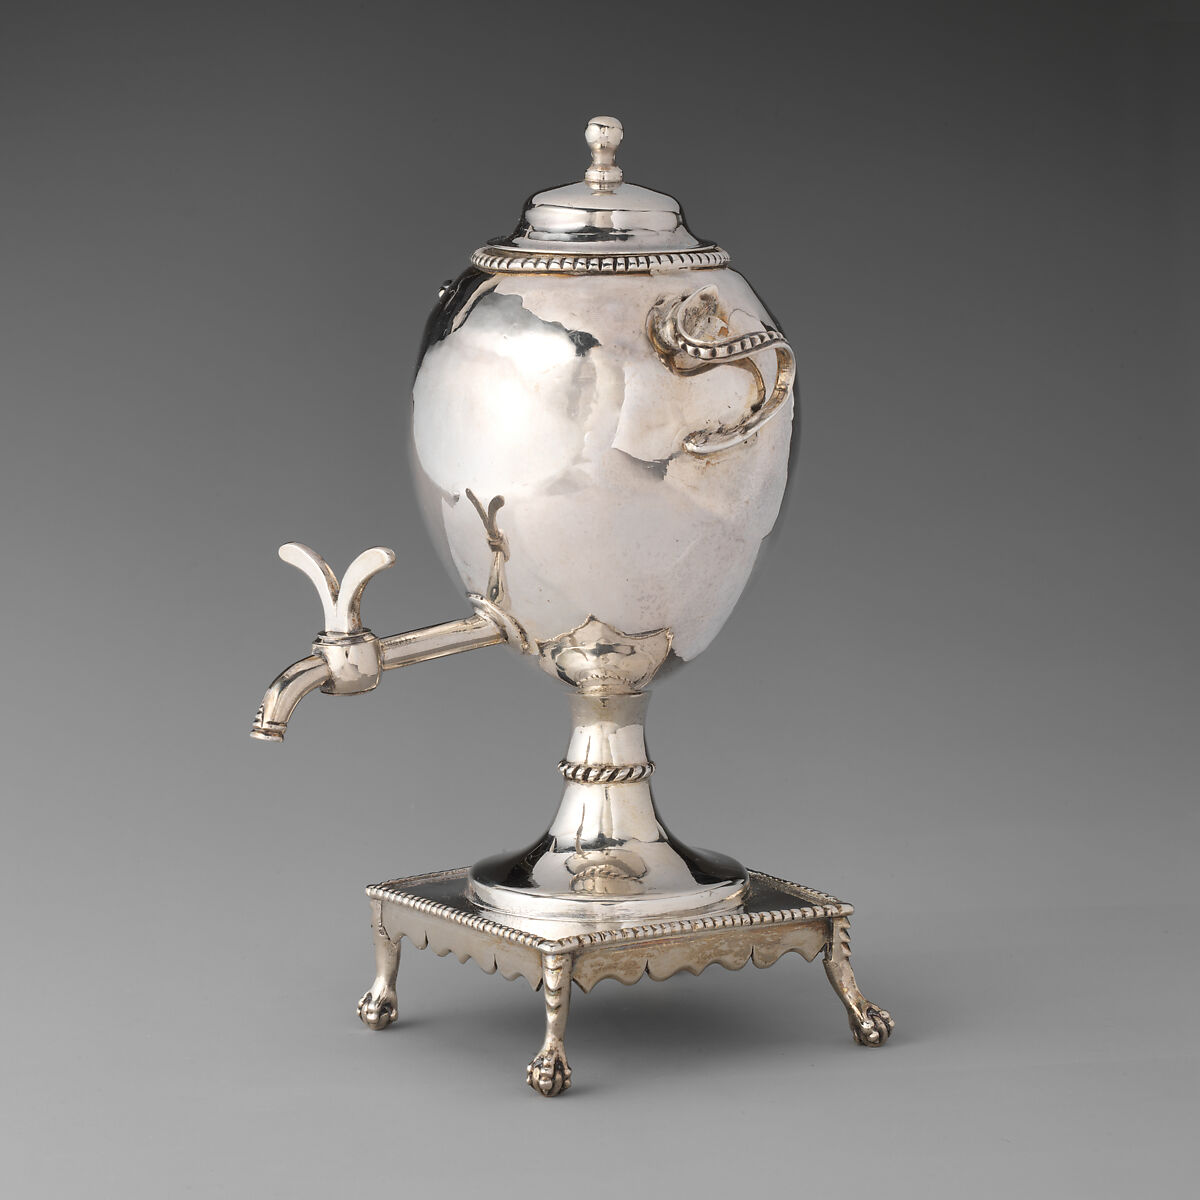 Miniature urn with cover, A. L. &amp; W. L., Silver, probably British, London 